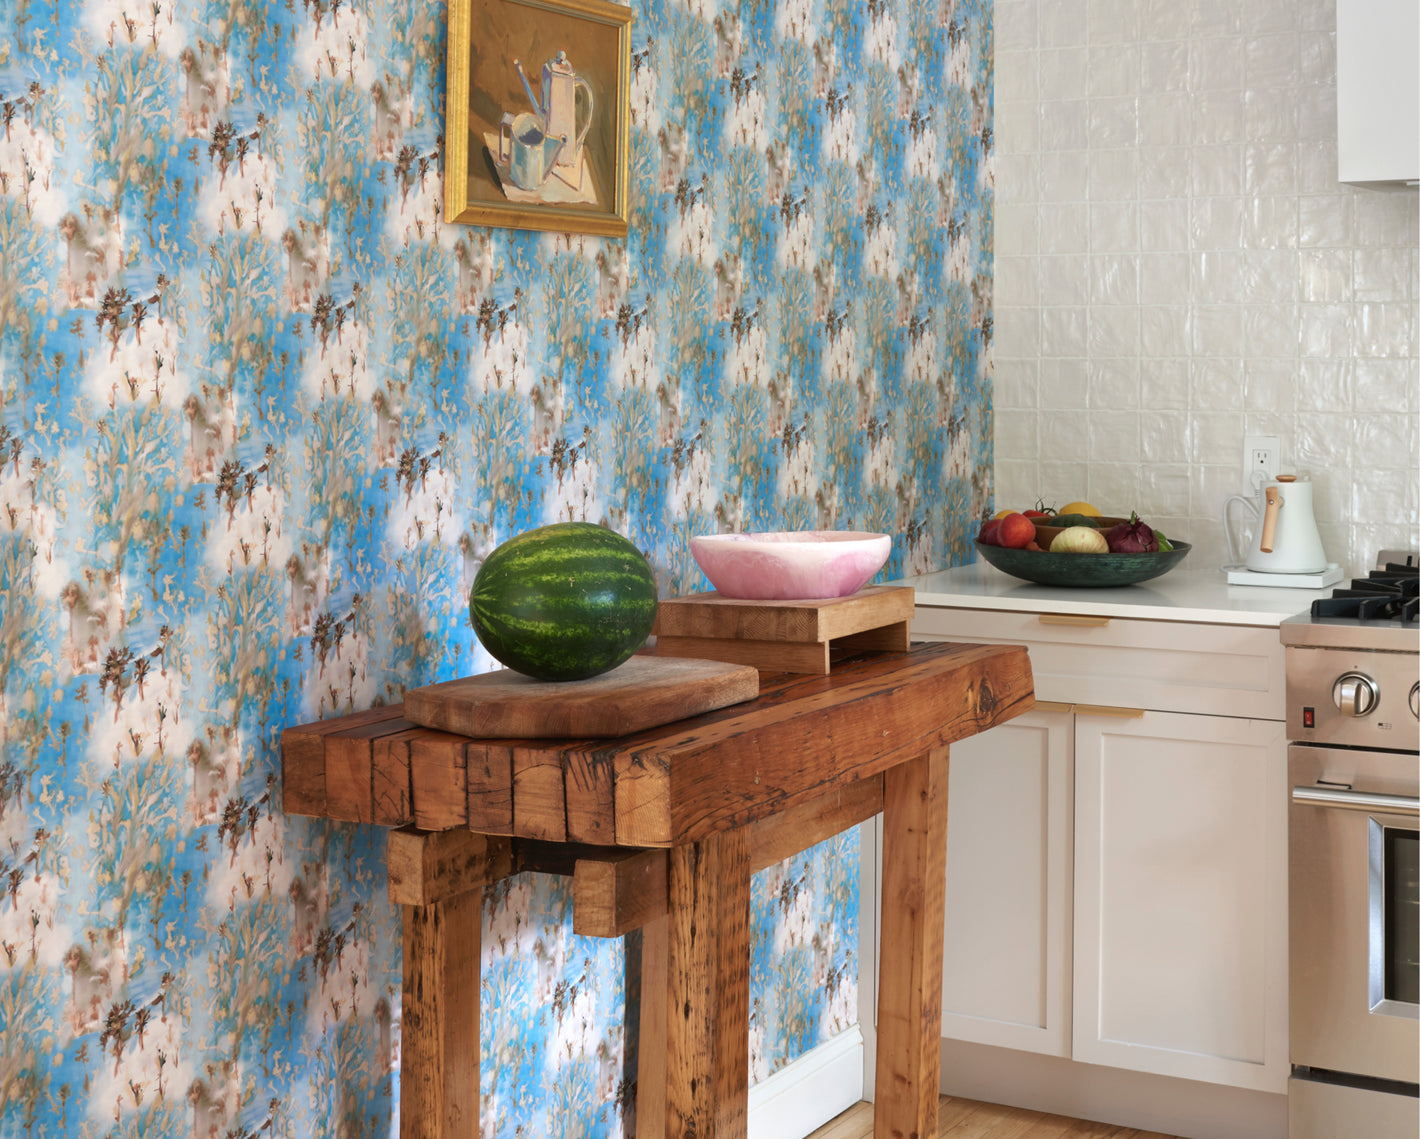 A blue and white wallpaper adorns the kitchen